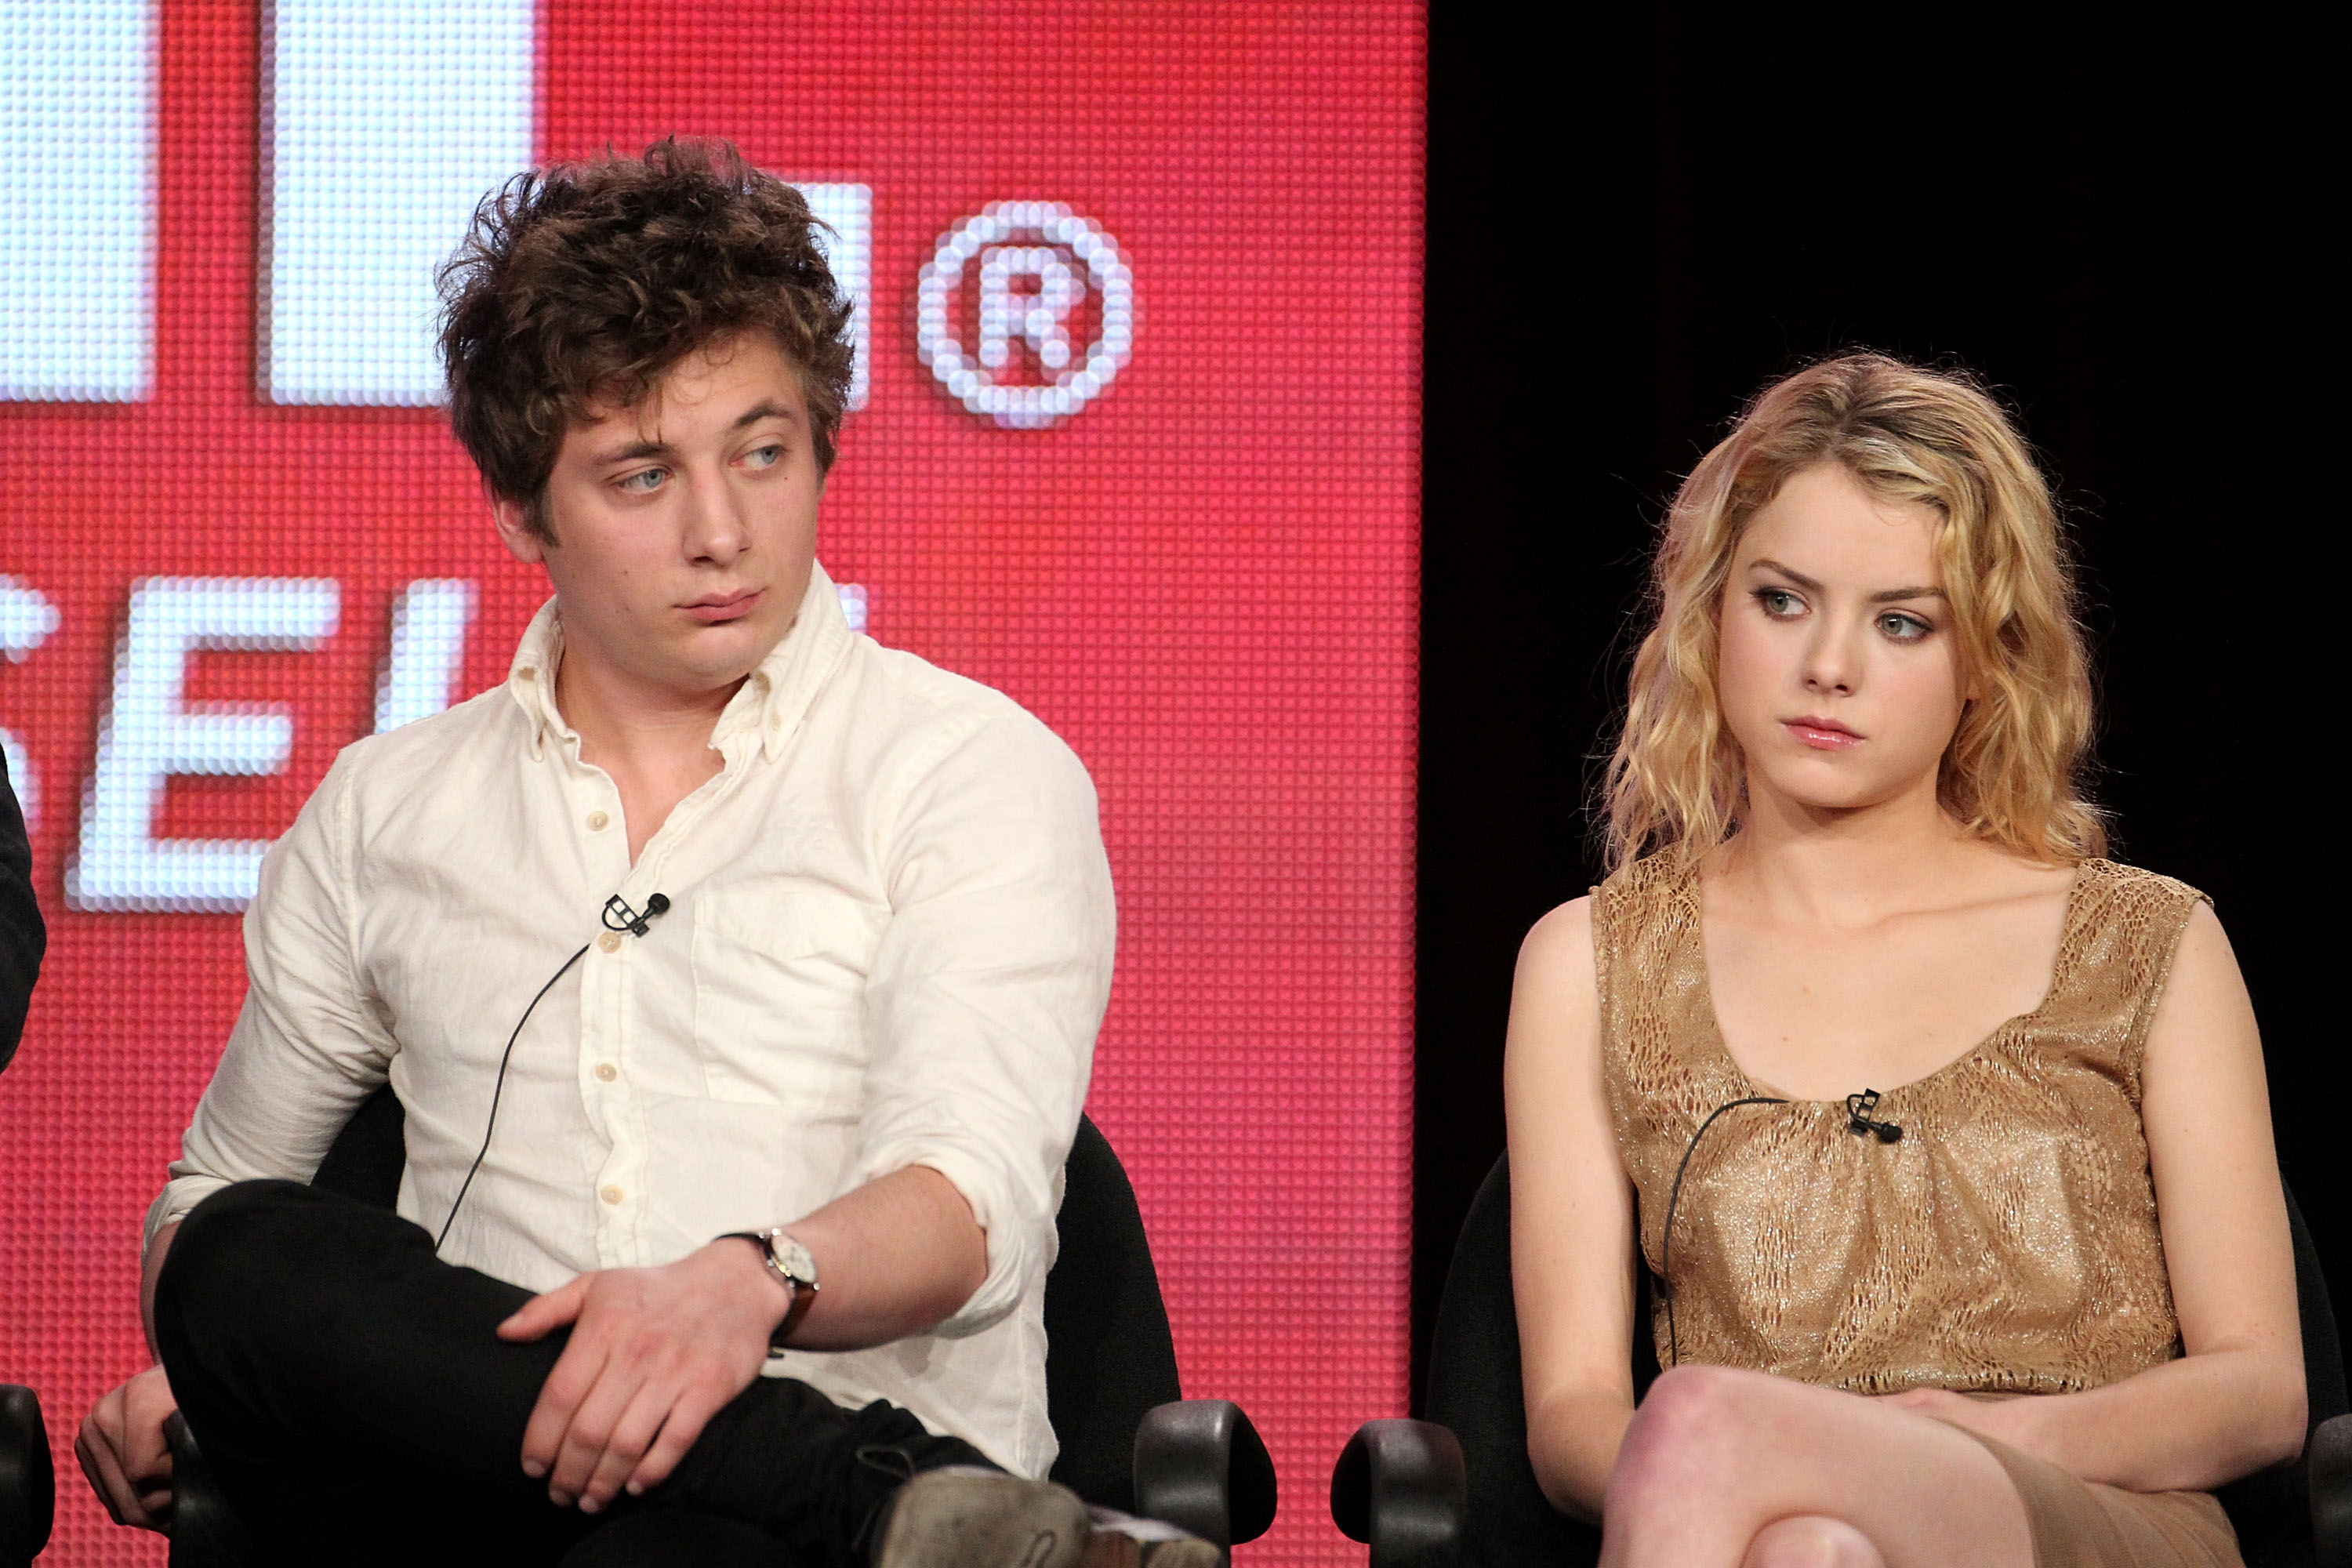 Actors Jeremy Allen White (L) and Laura Wiggins of the television show 'Shameless' speak during the Showtime portion of the 2012 Television Critics Association Press Tour